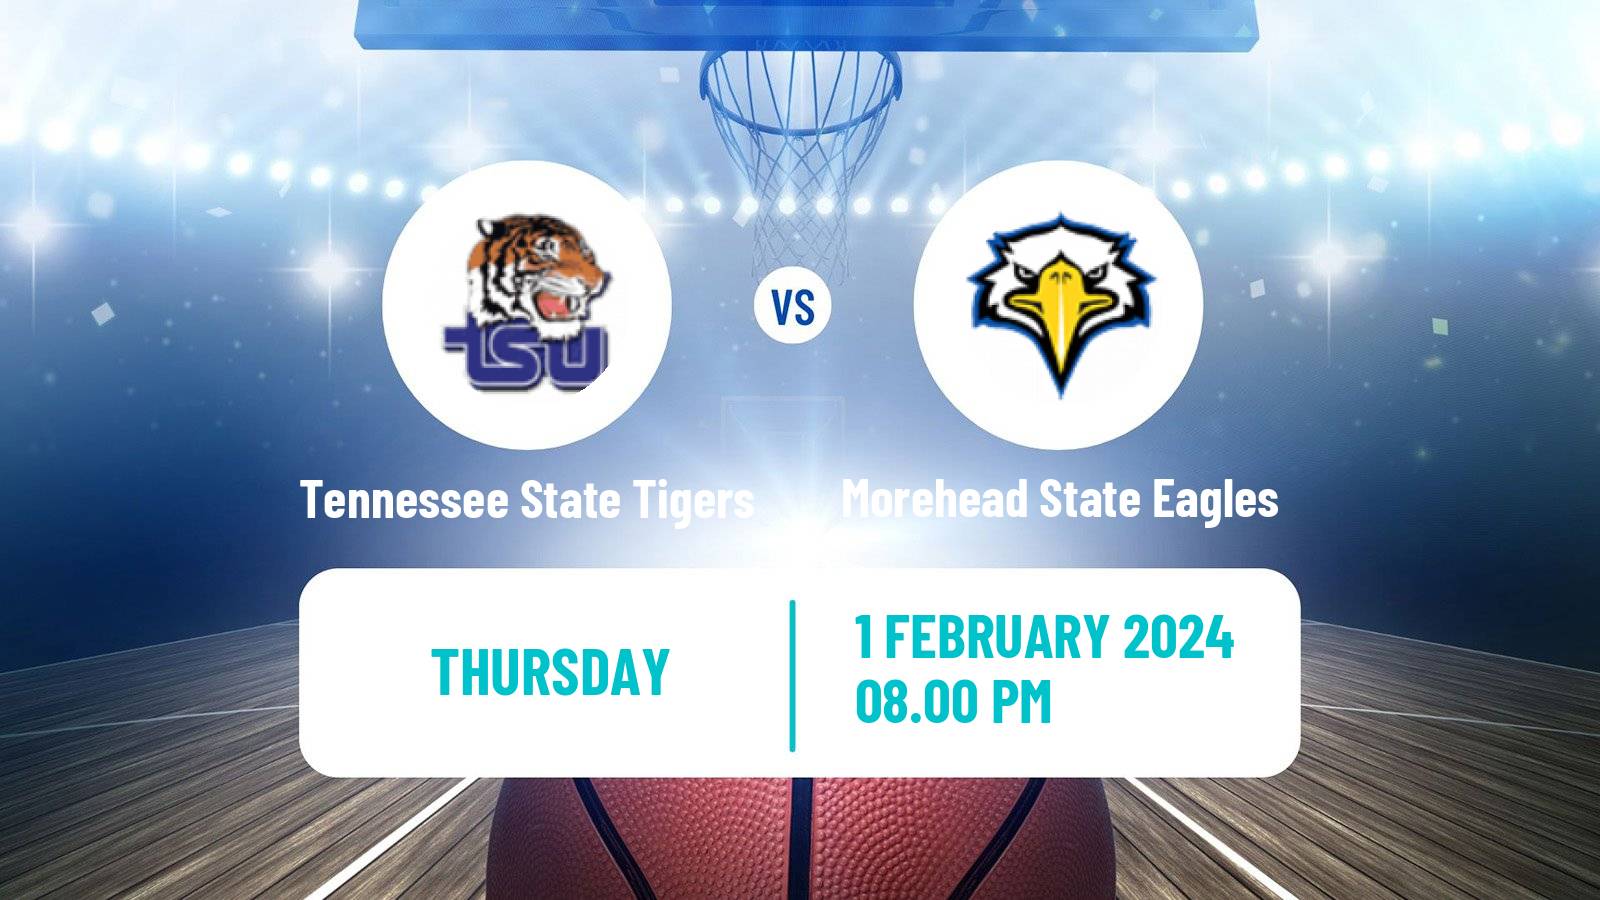 Basketball NCAA College Basketball Tennessee State Tigers - Morehead State Eagles